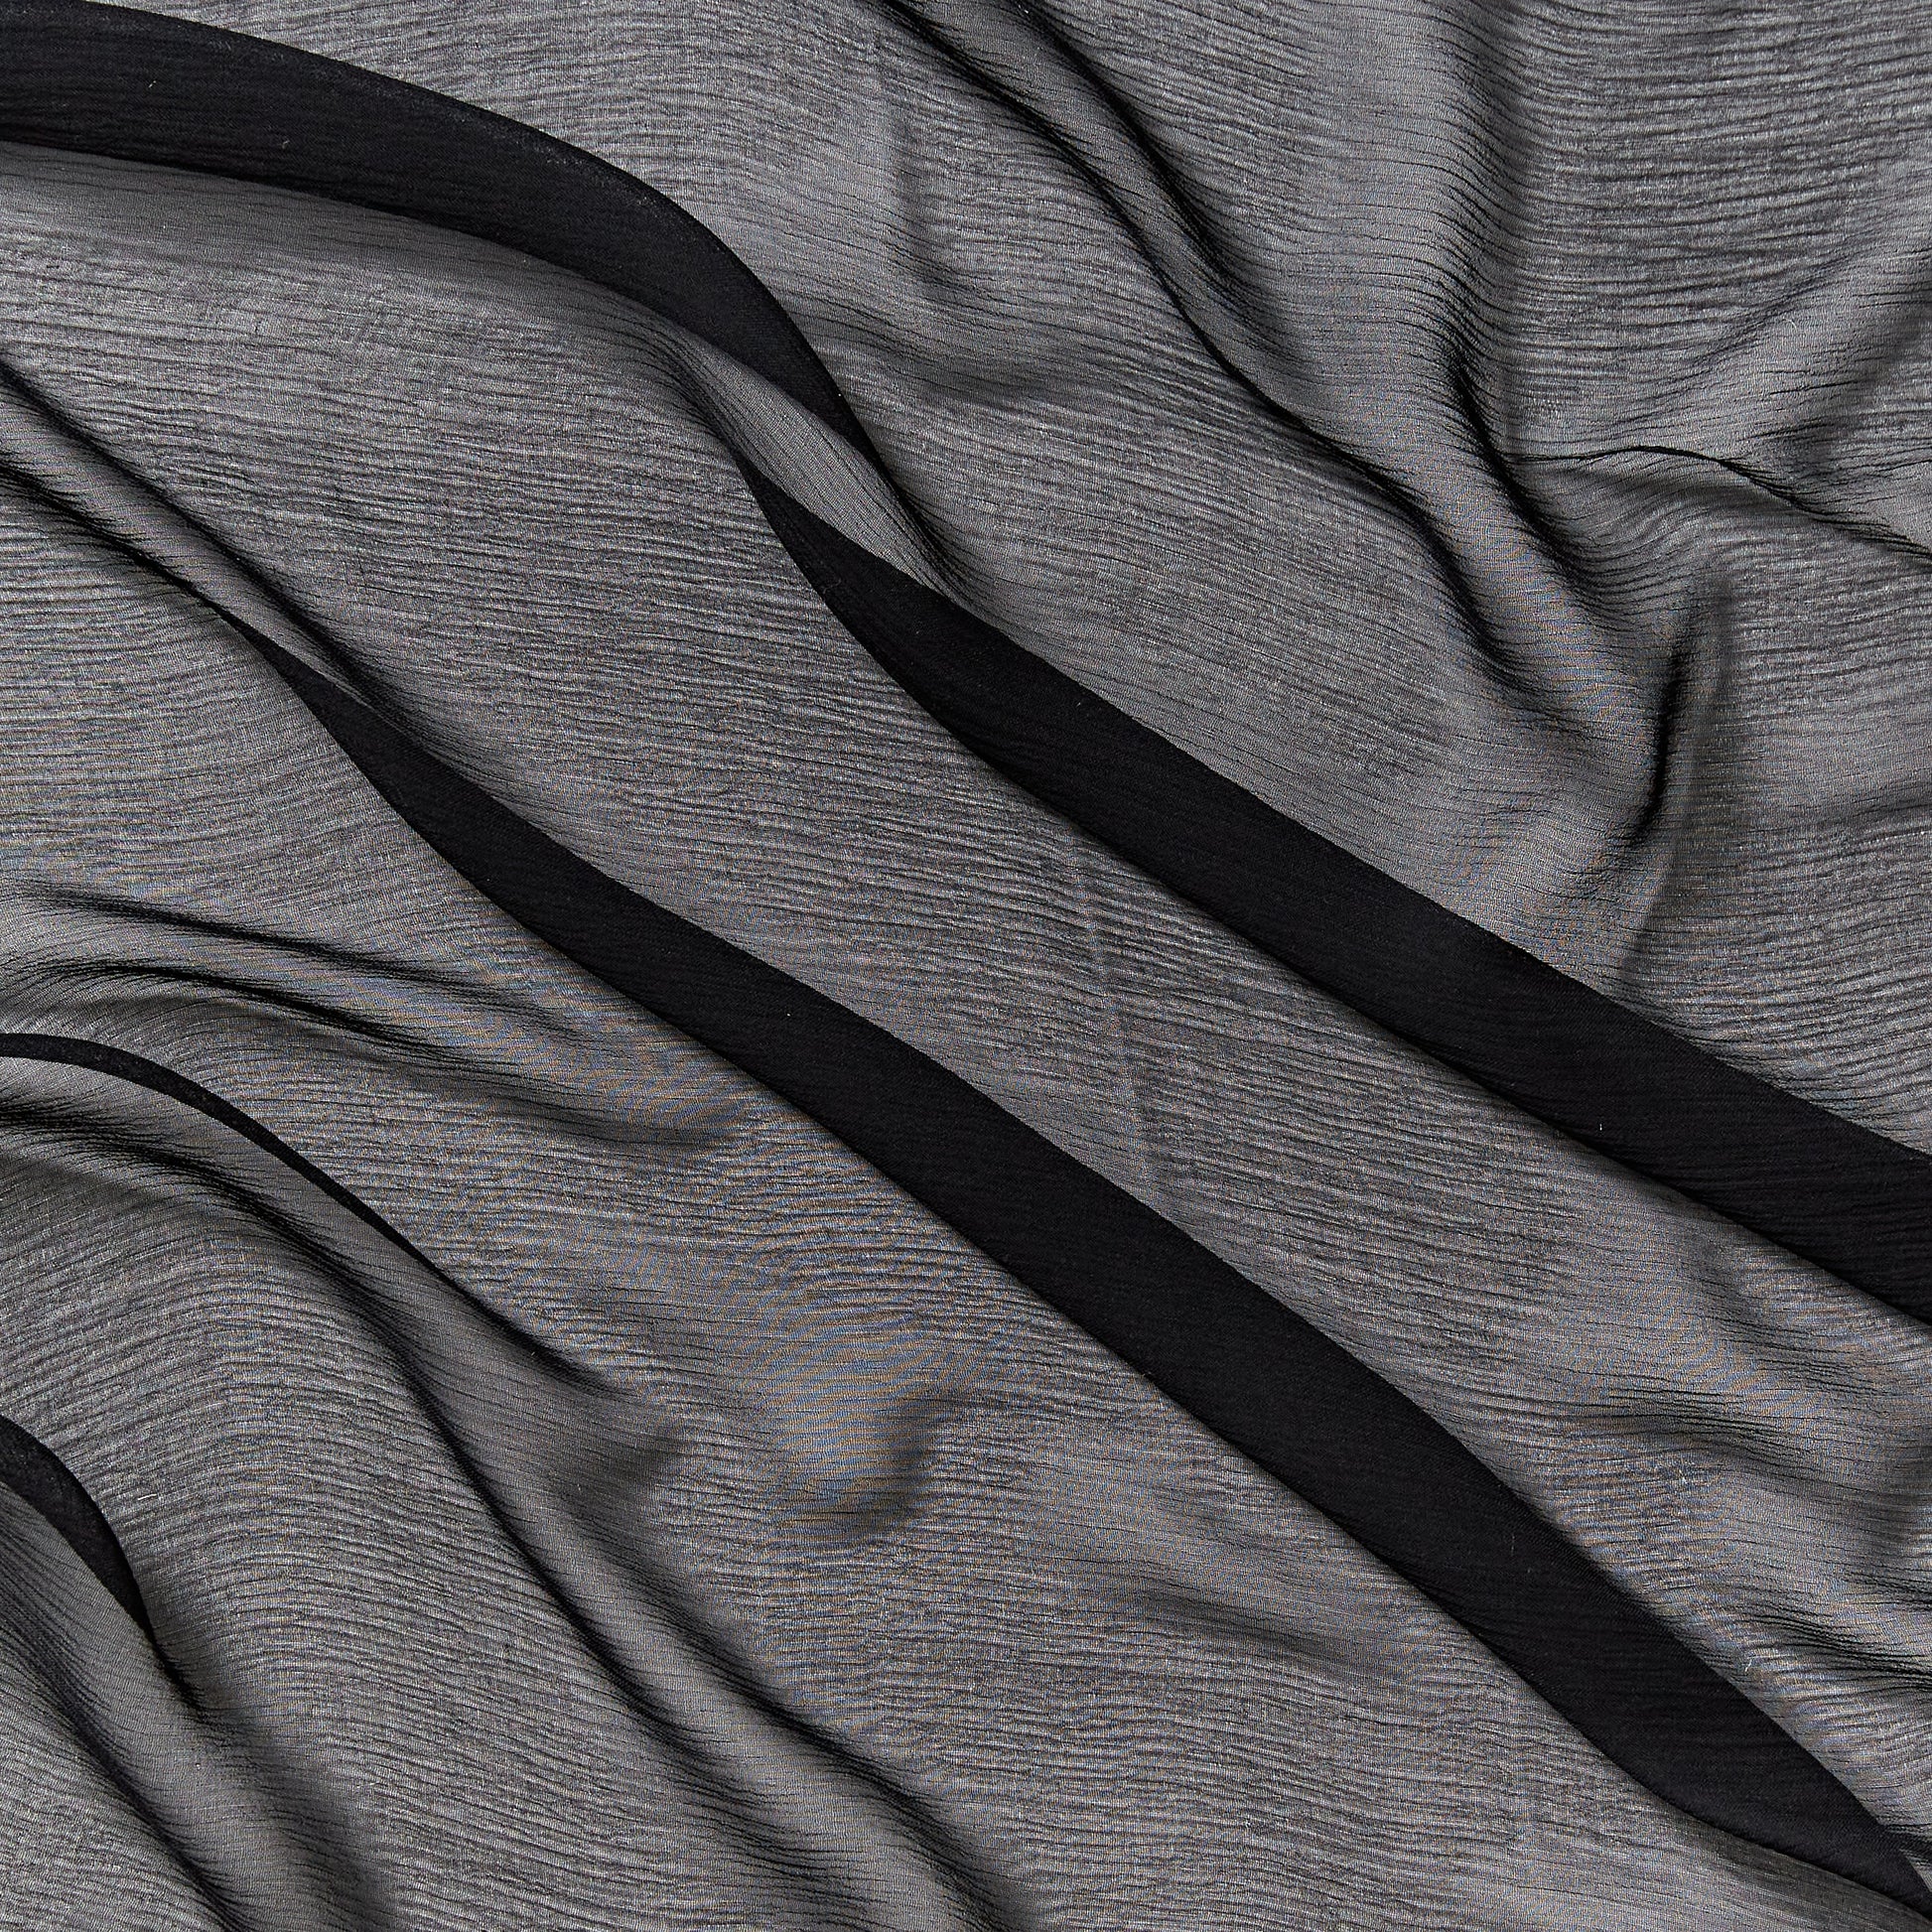 silk crinkle chiffon featuring the black color version of a sheer soft pure silk with textured yoryu weave and fluid drape